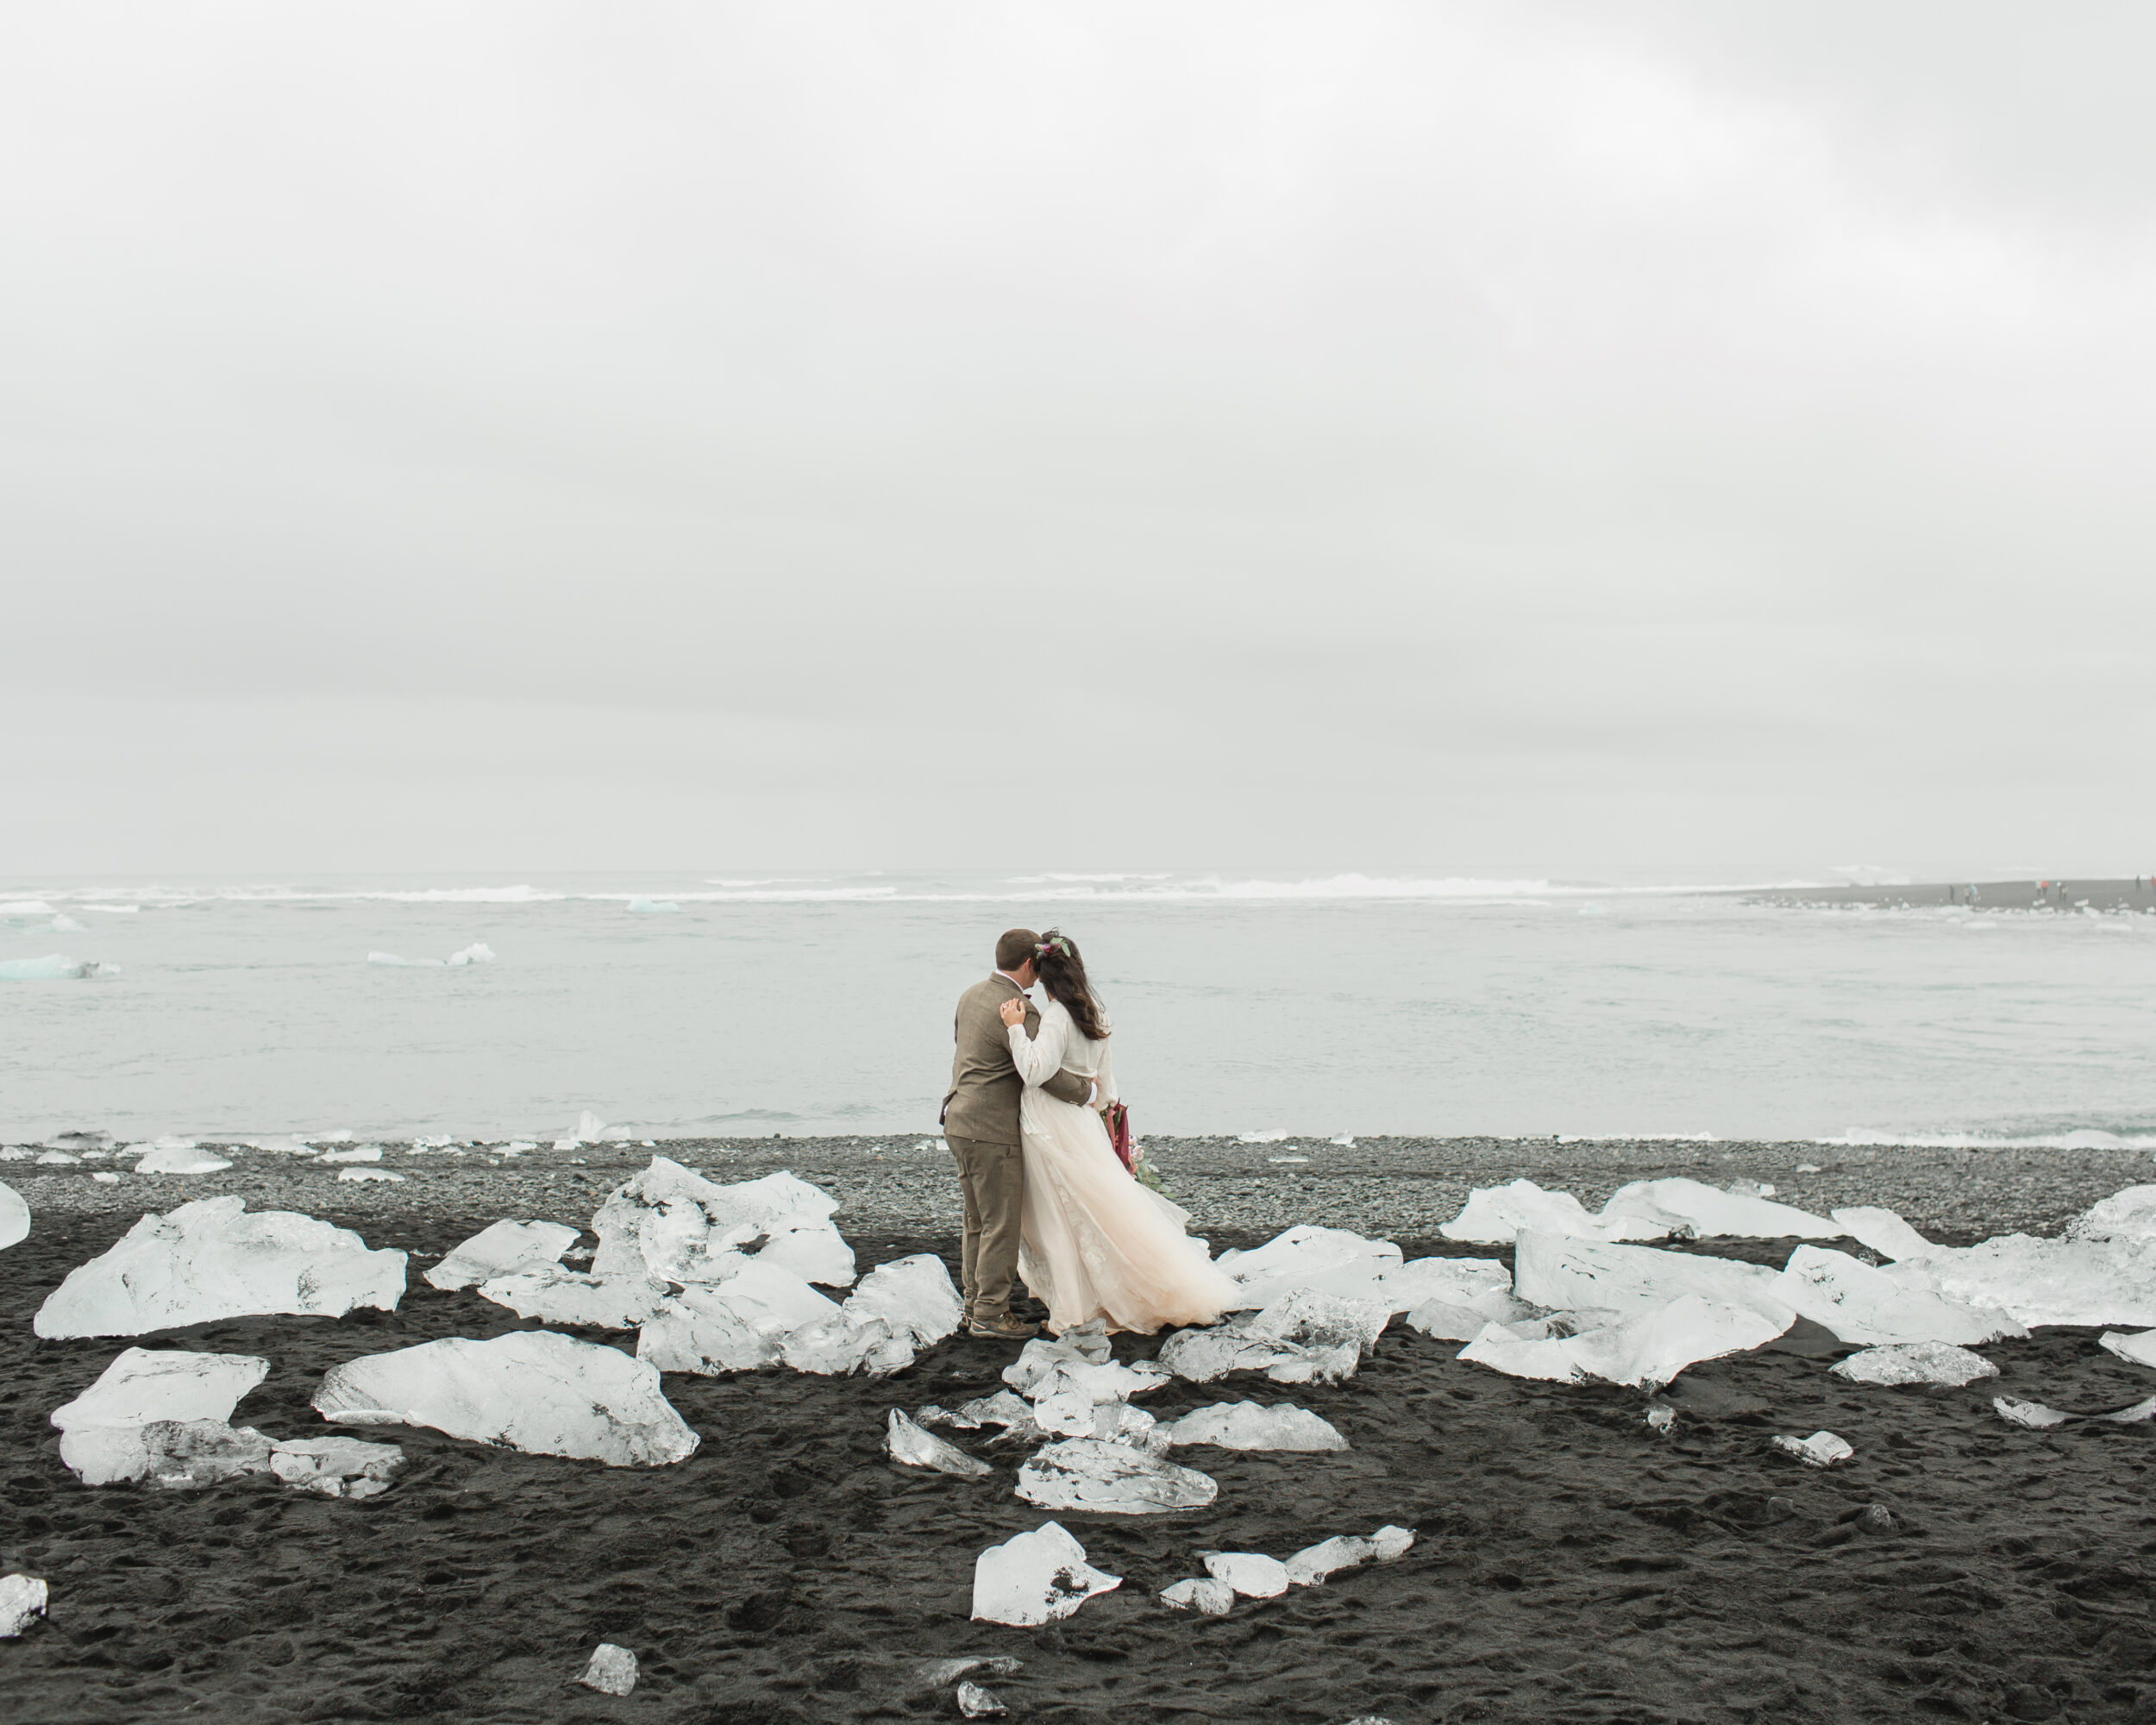 A couple shares a kiss during their wedding ceremony on a beach in Iceland.